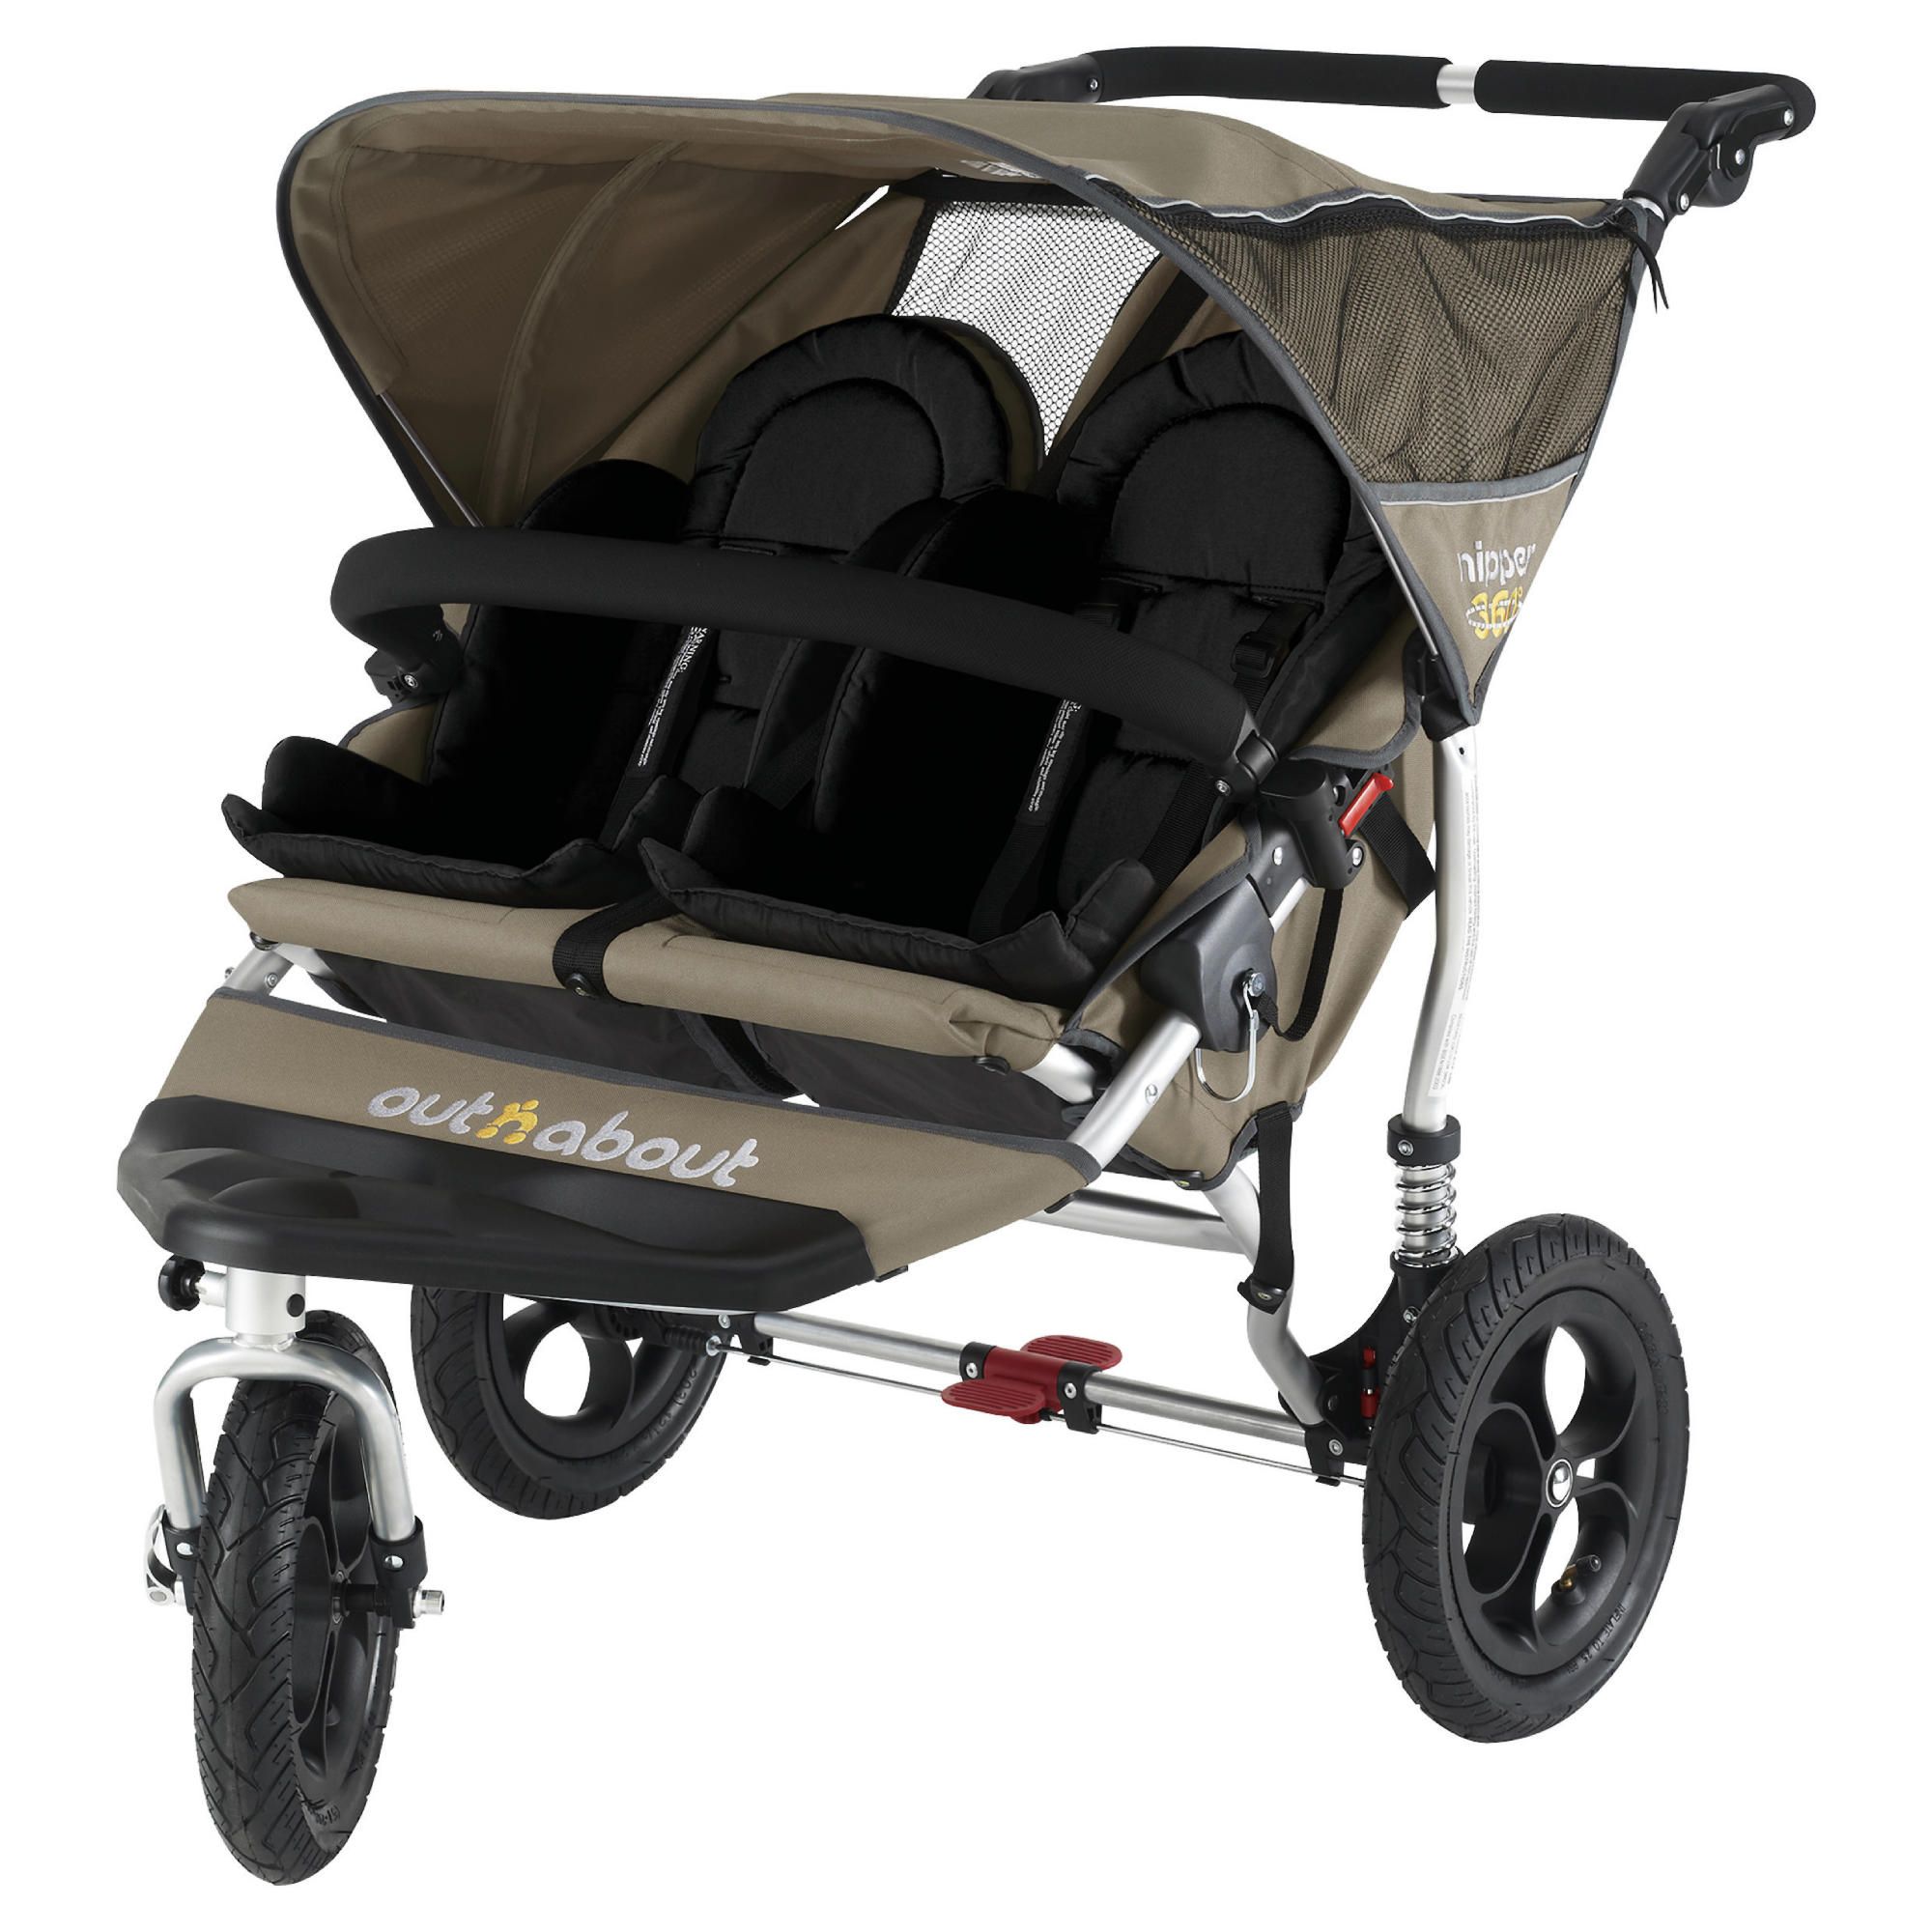 Out 'n' About V2 Nipper 360, Double 3 wheeler Pushchair, Carmel at Tesco Direct